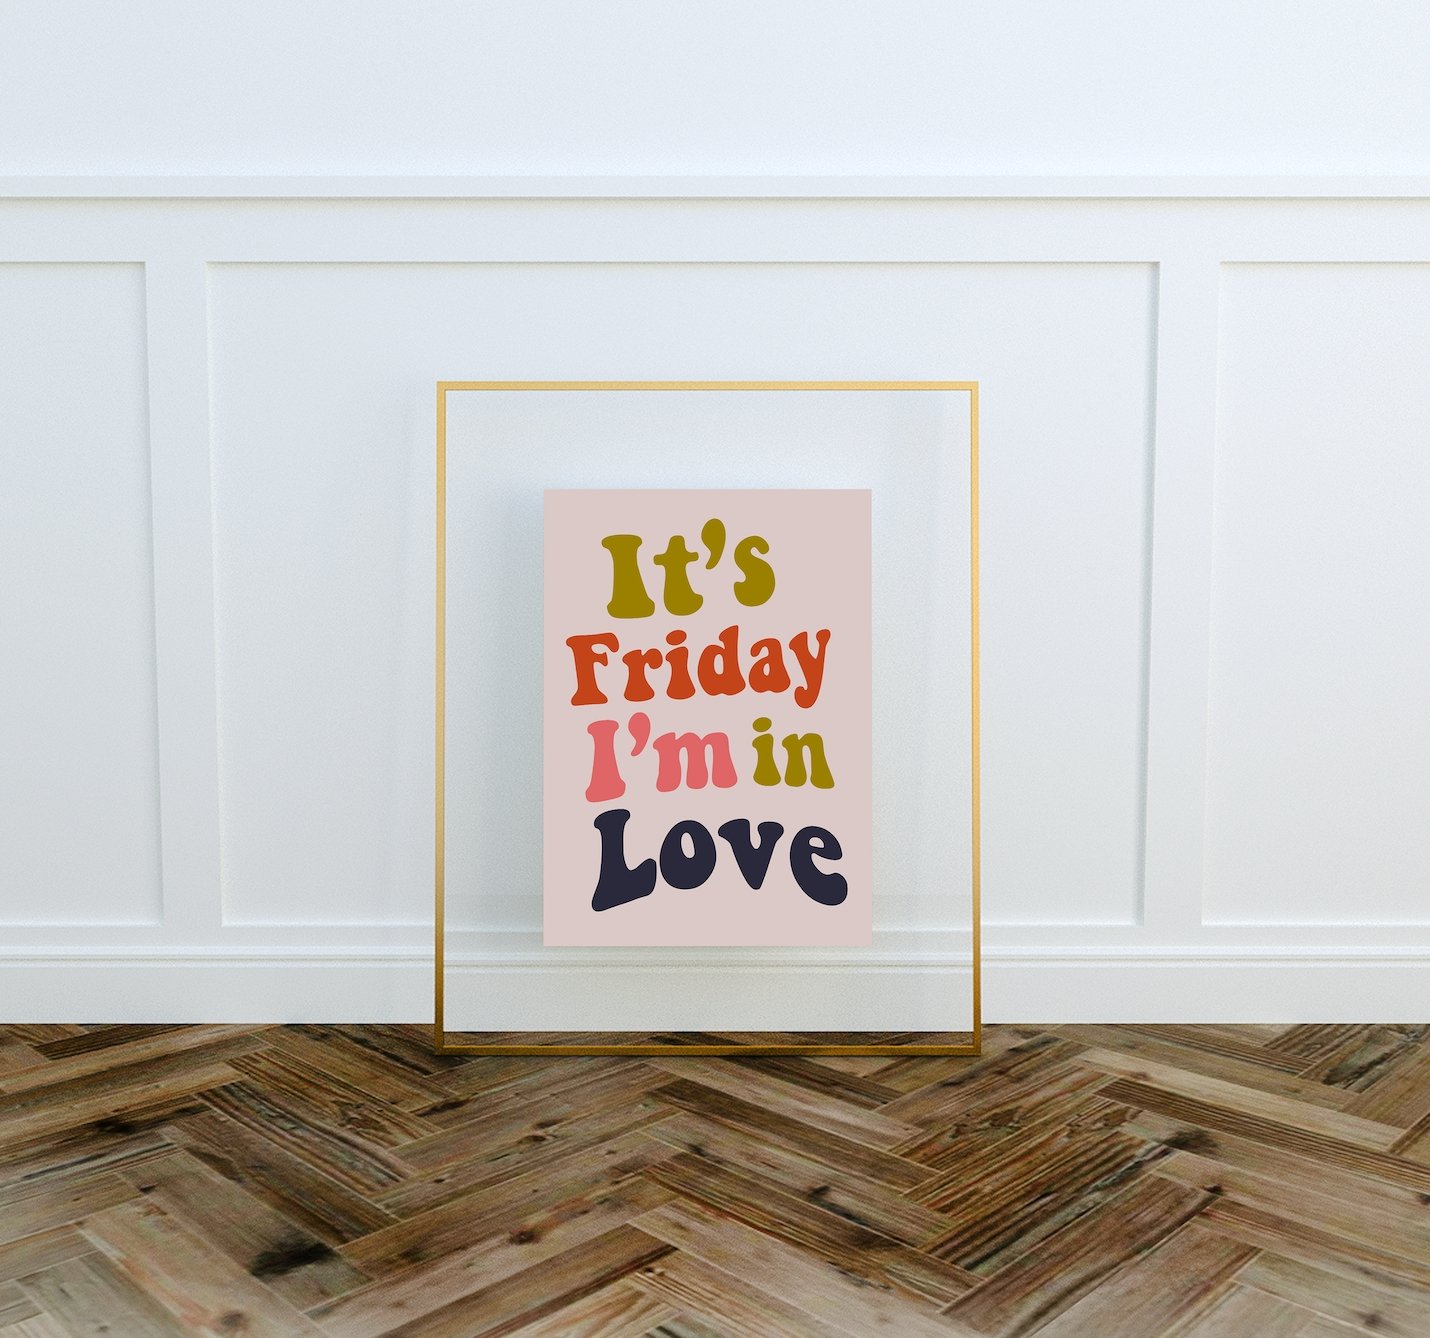 Cool Music Poster- It's Friday I'm in Love